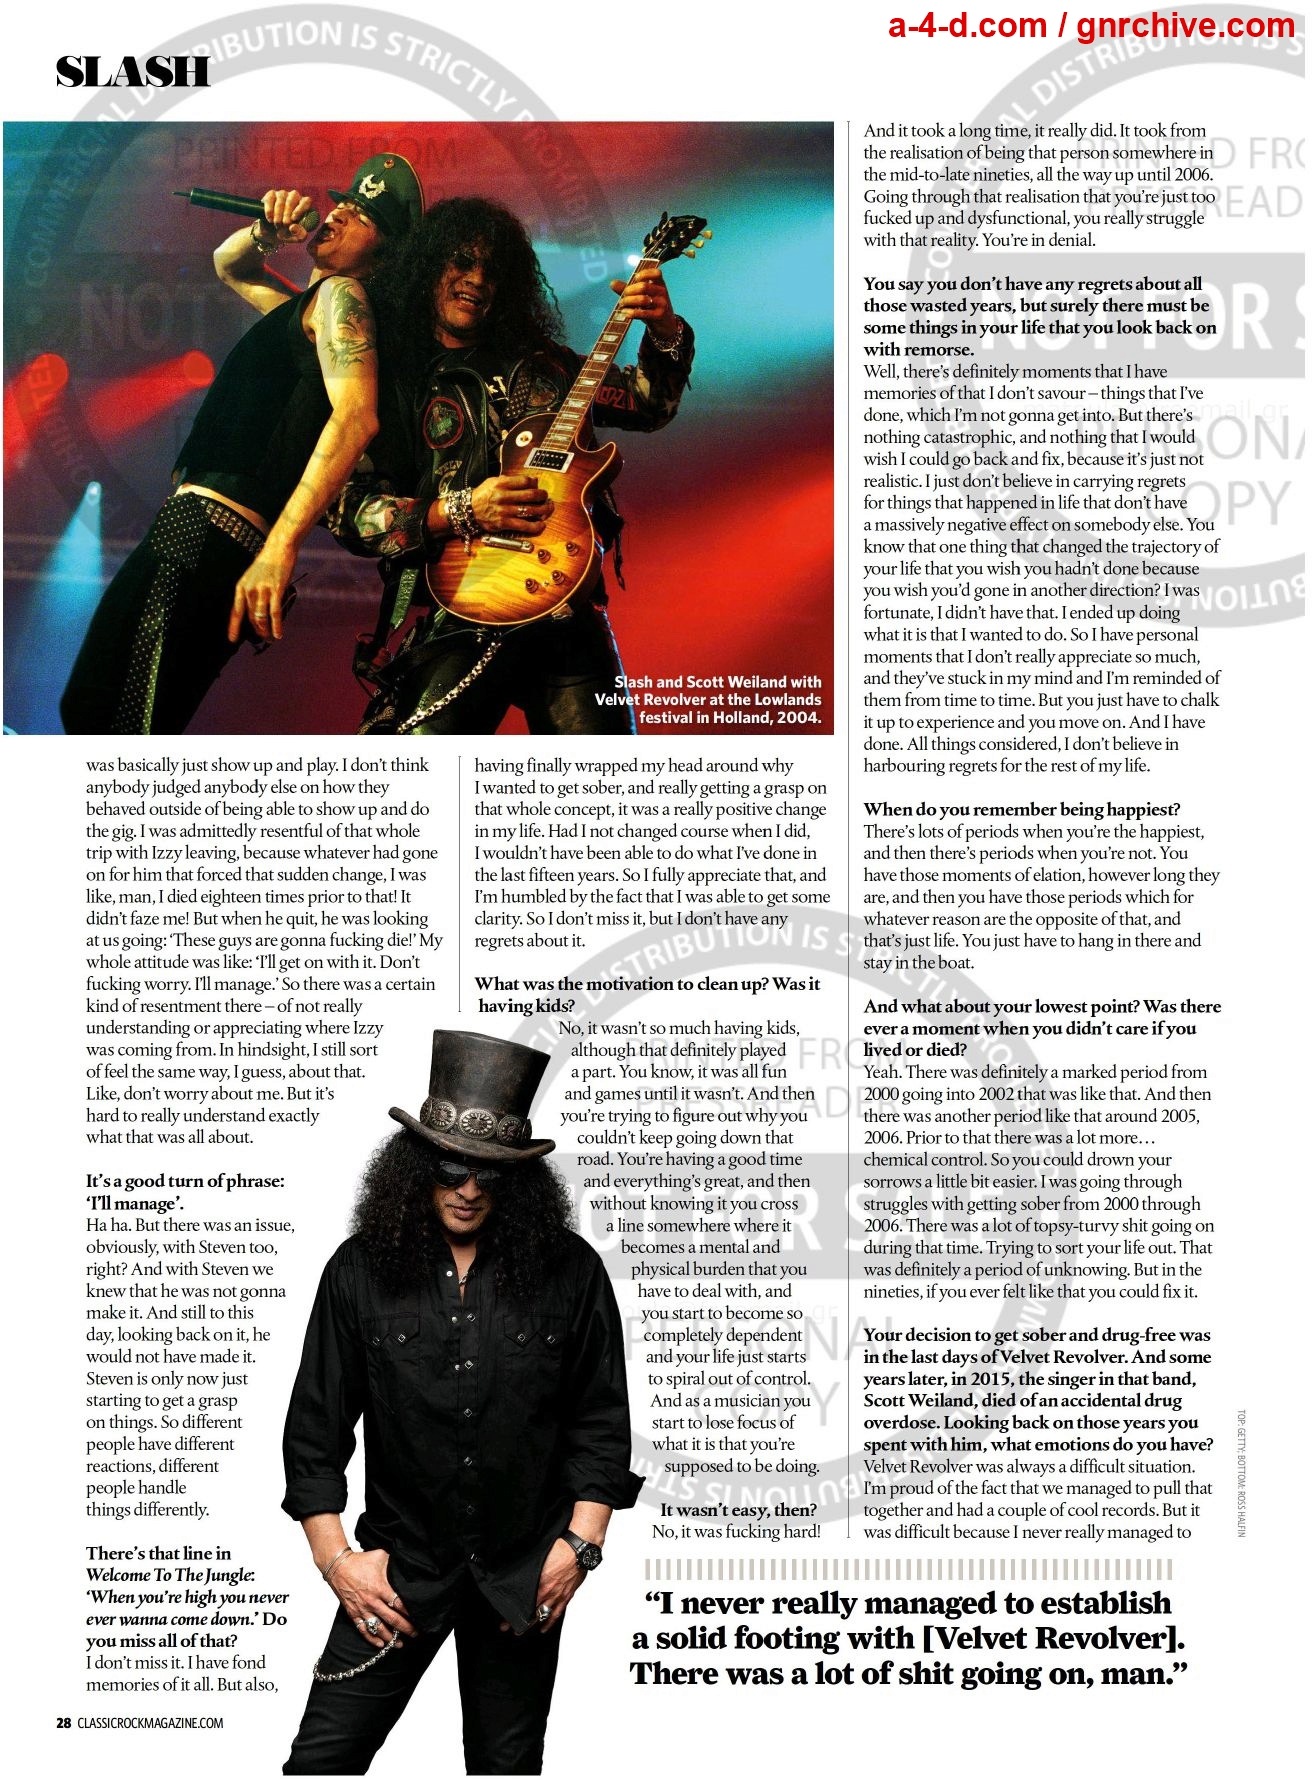 2022.01.DD - Classic Rock - Interview with Slash 2022_014